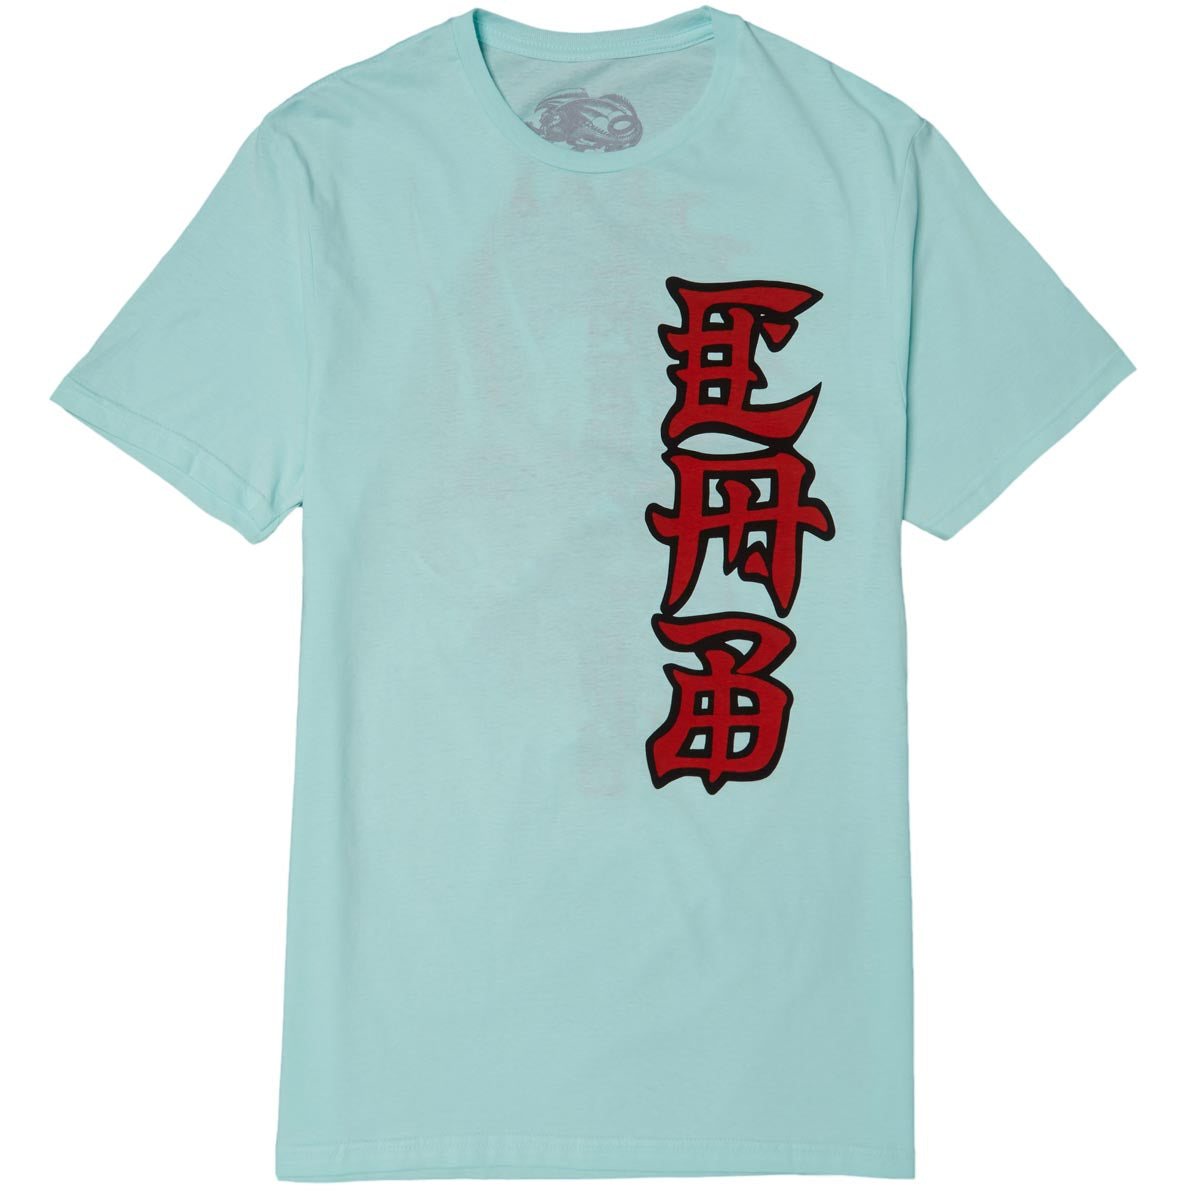 Powell-Peralta Steve Caballero Ban This T-Shirt - Teal Ice image 2